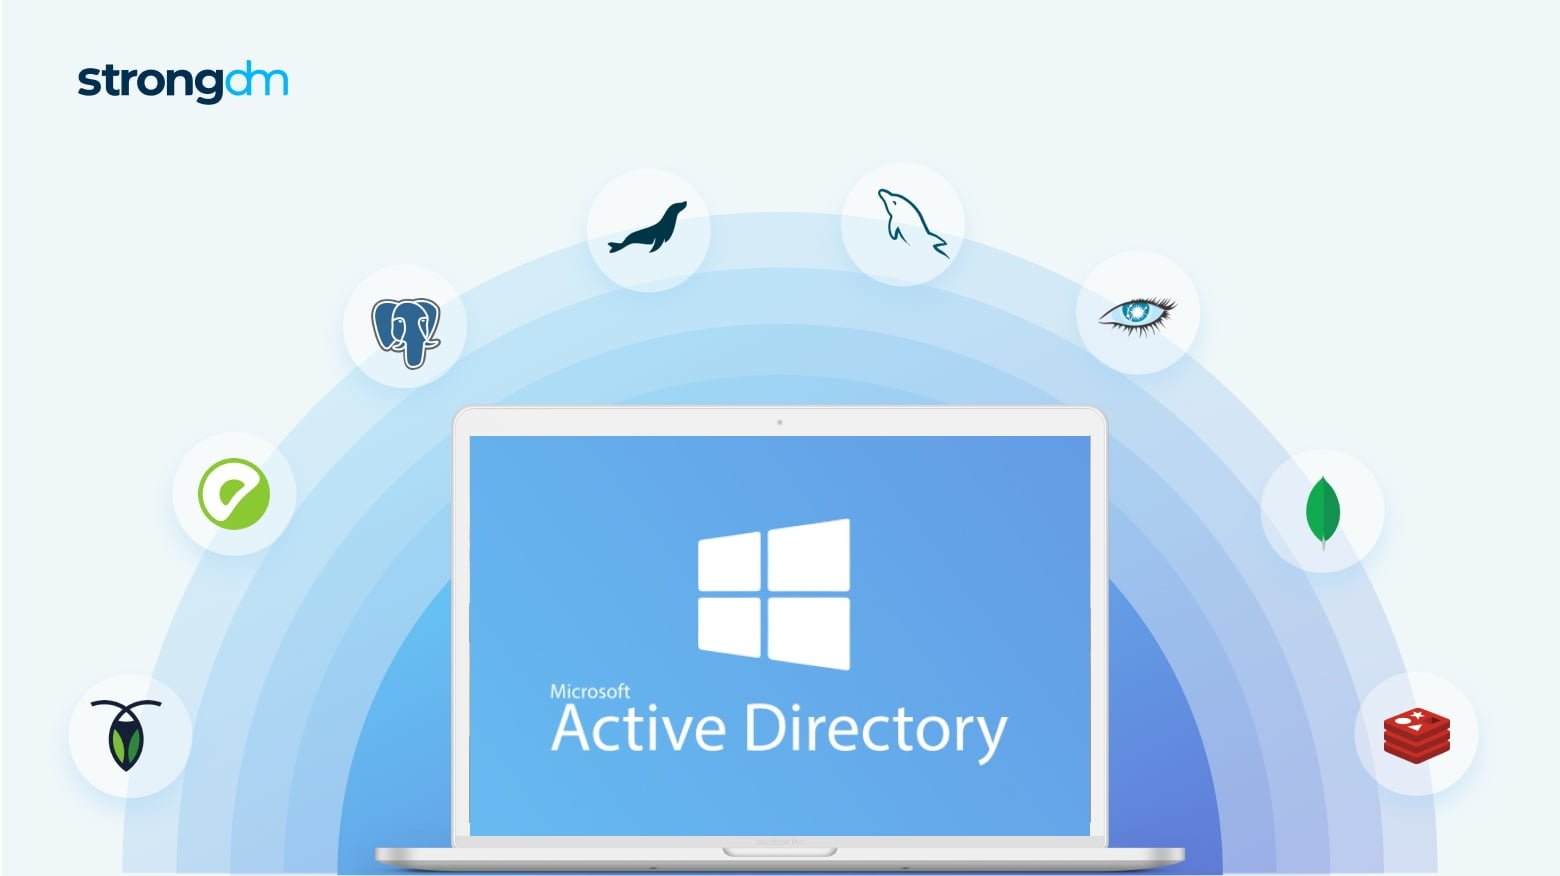 How to Find inactive user accounts in Active Directory